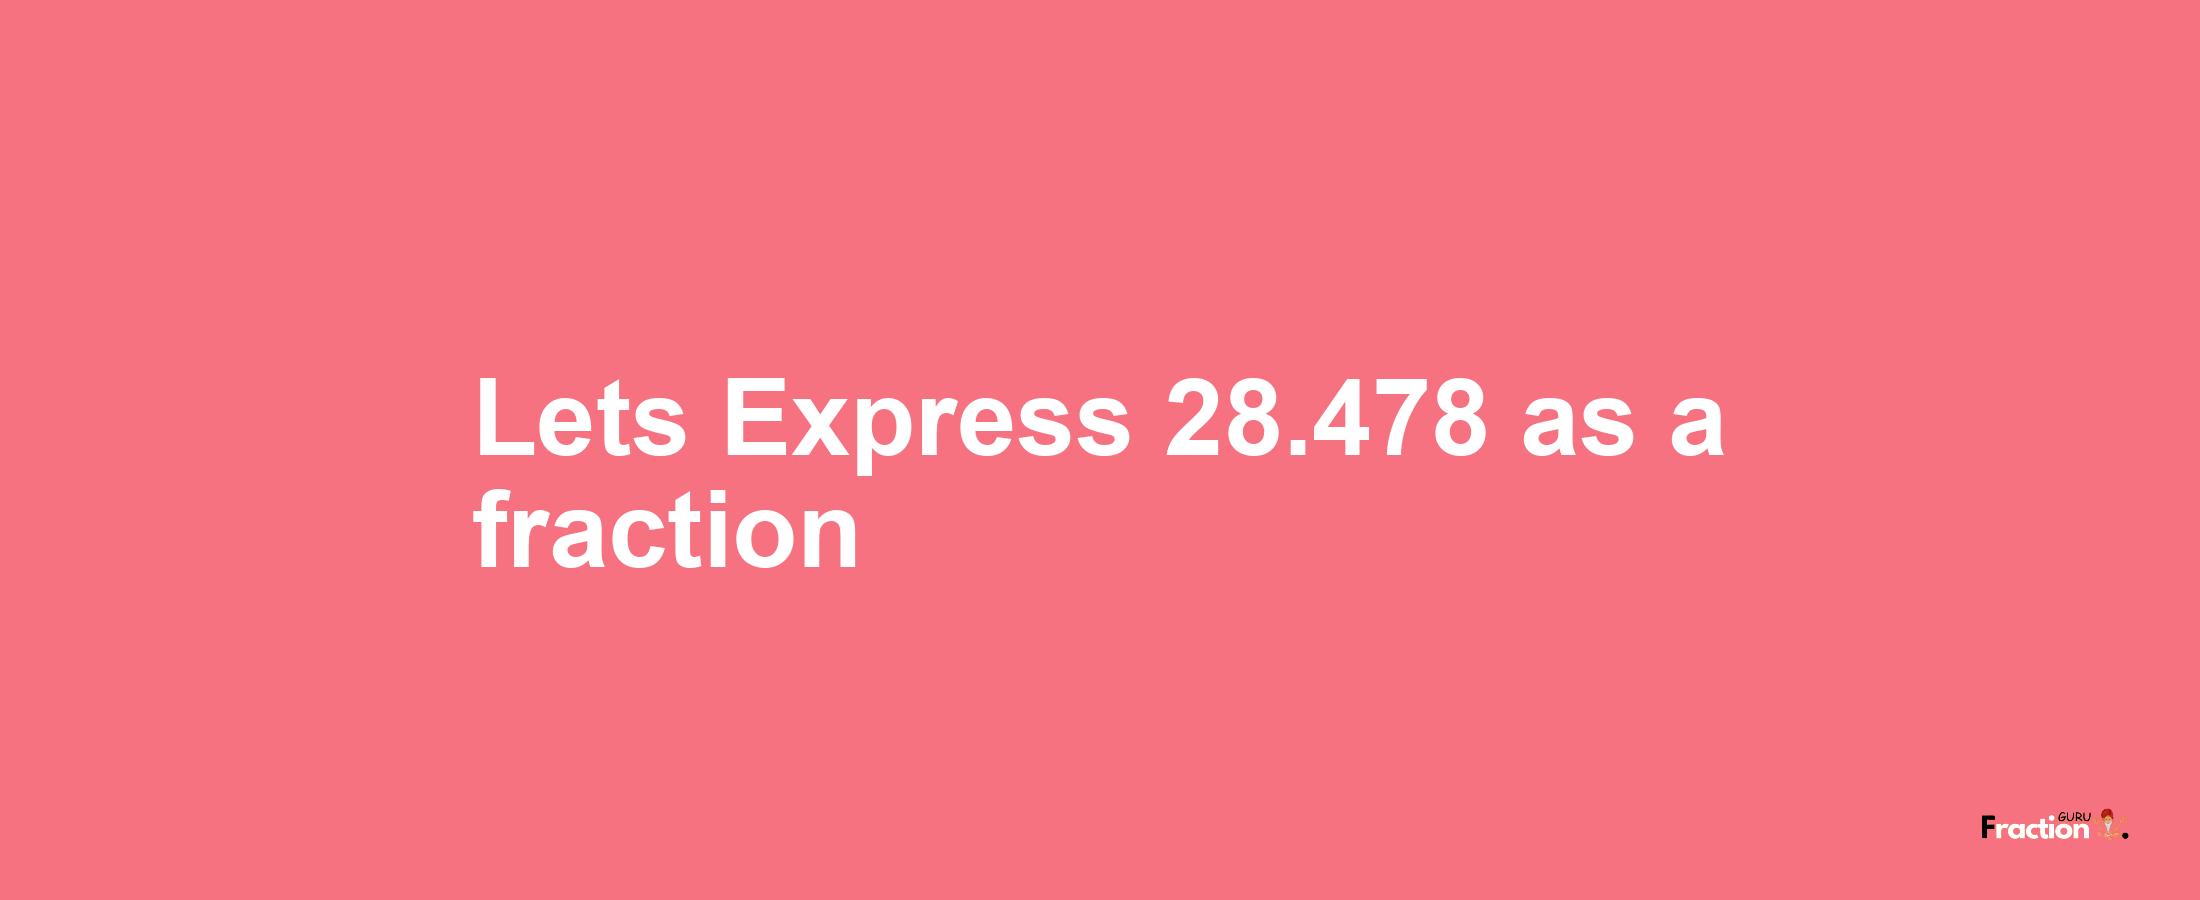 Lets Express 28.478 as afraction